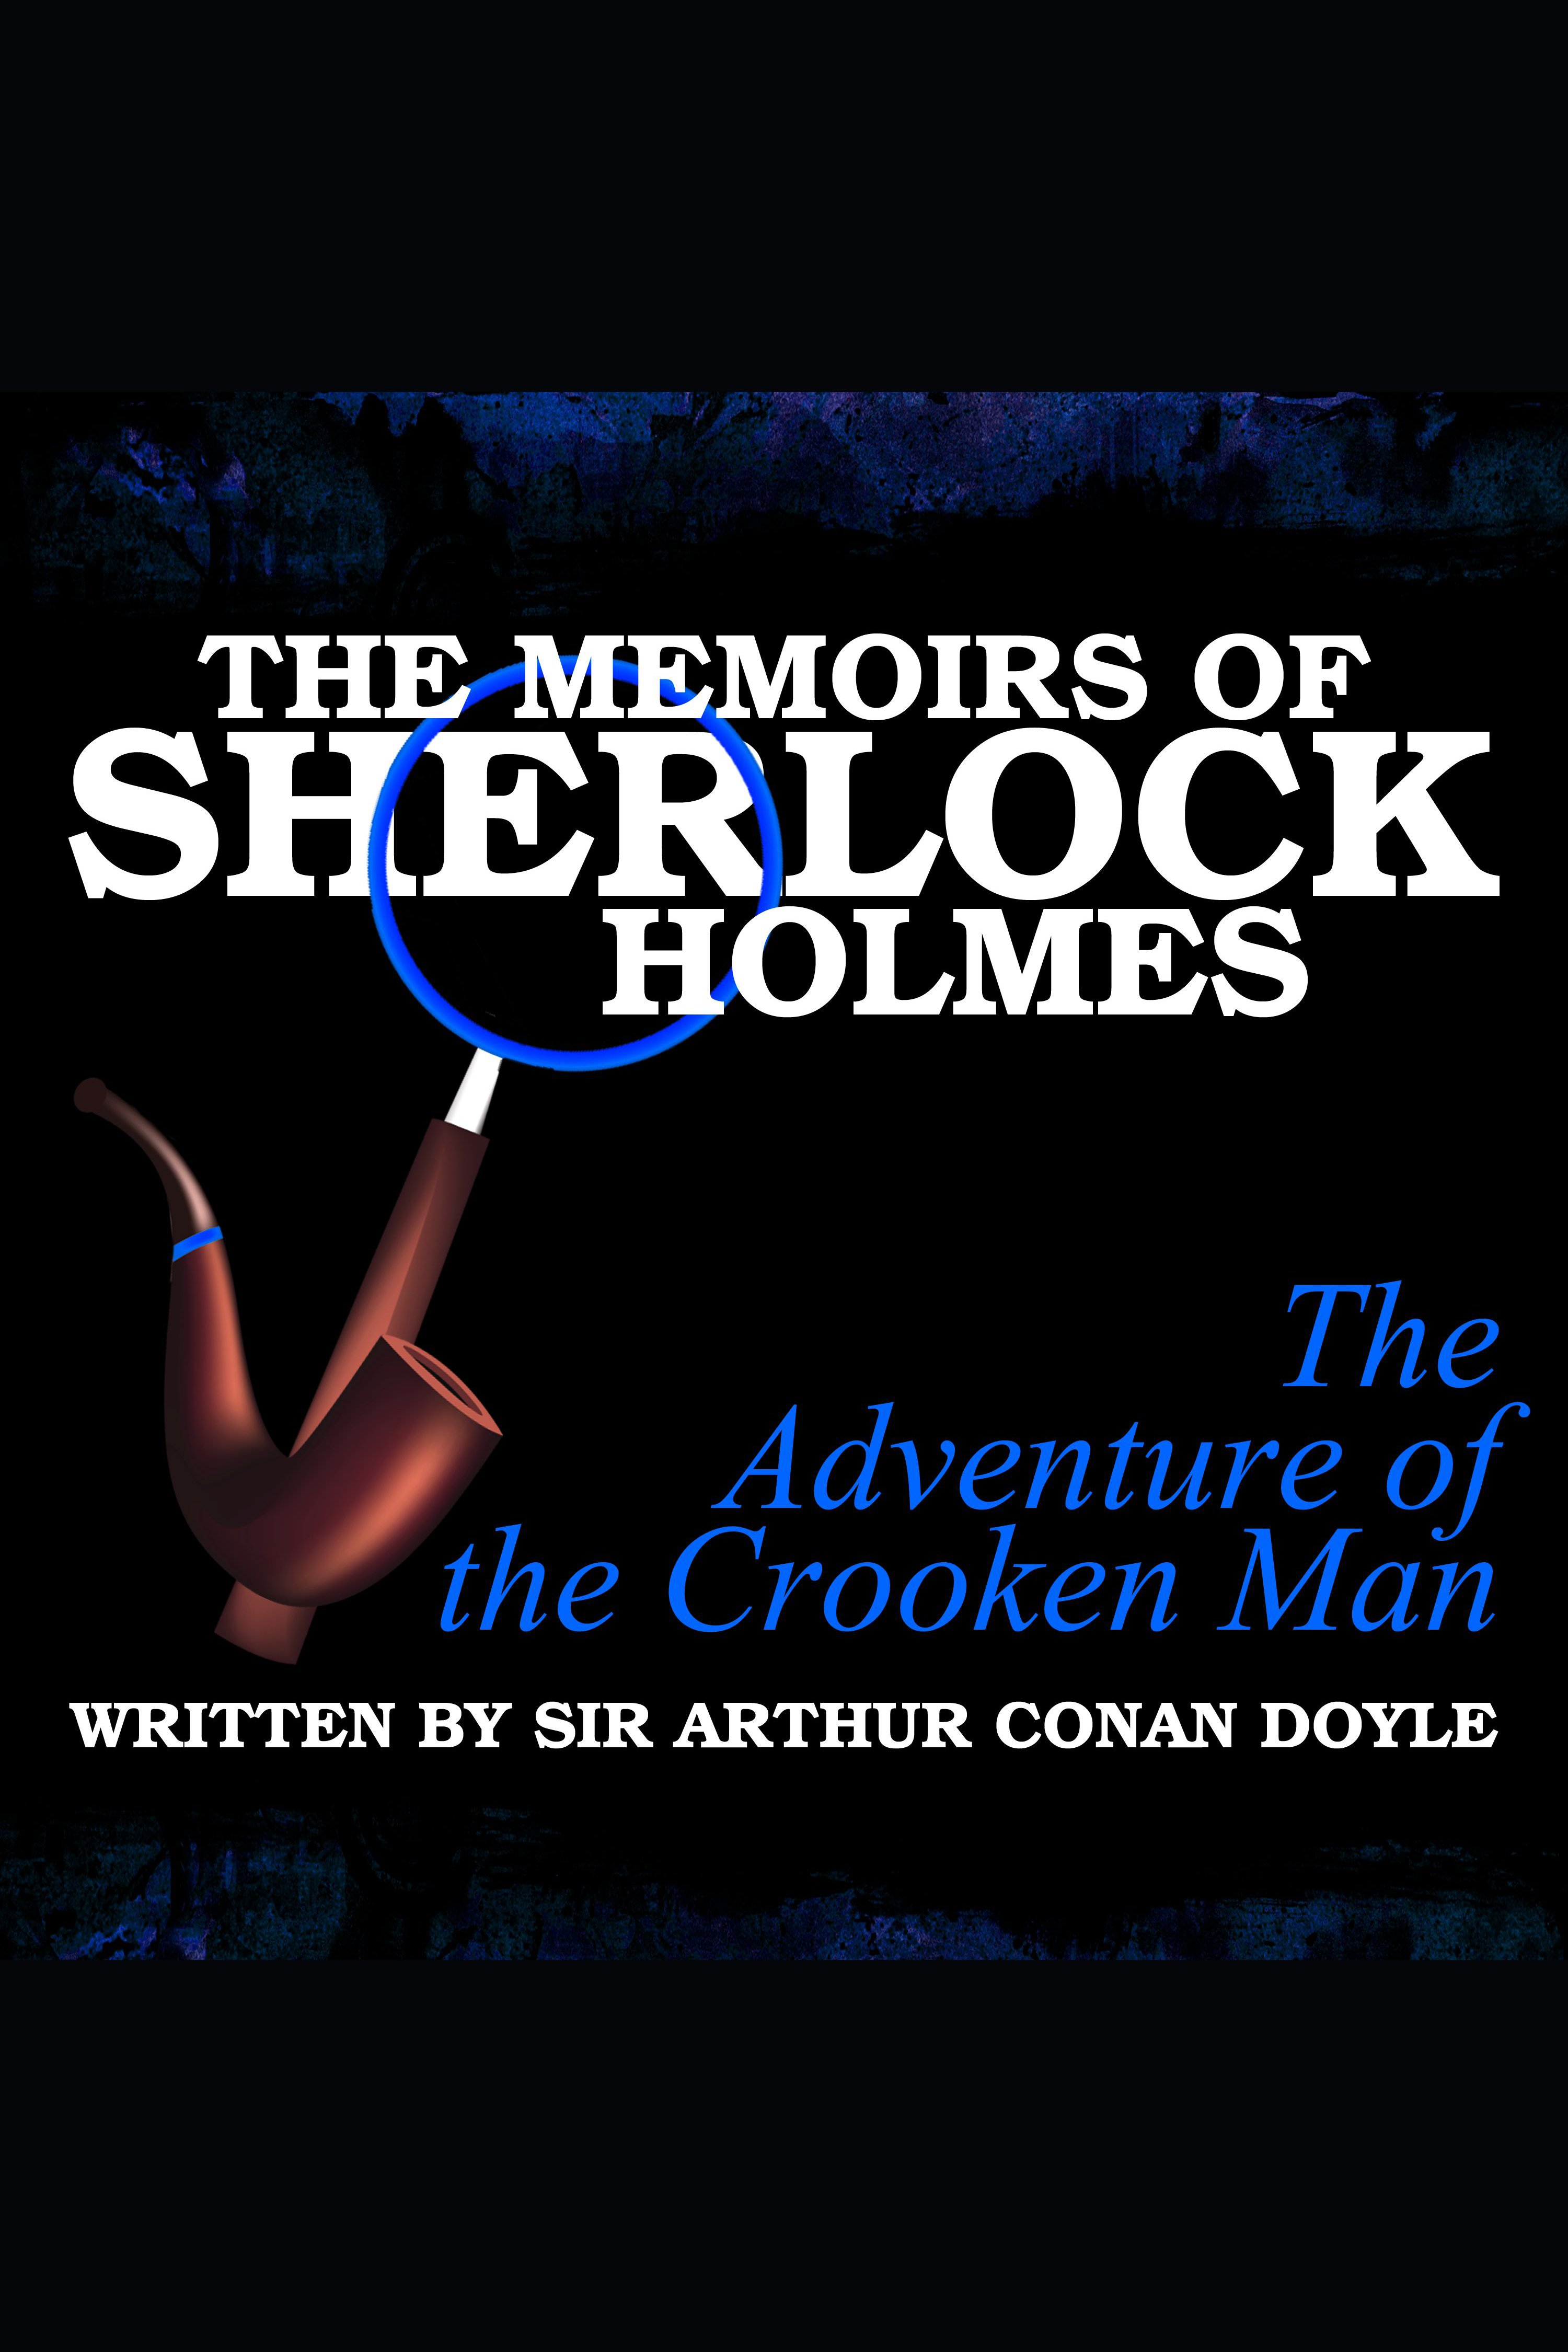 The Memoirs of Sherlock Holmes - The Adventure of the Crooked Man cover image